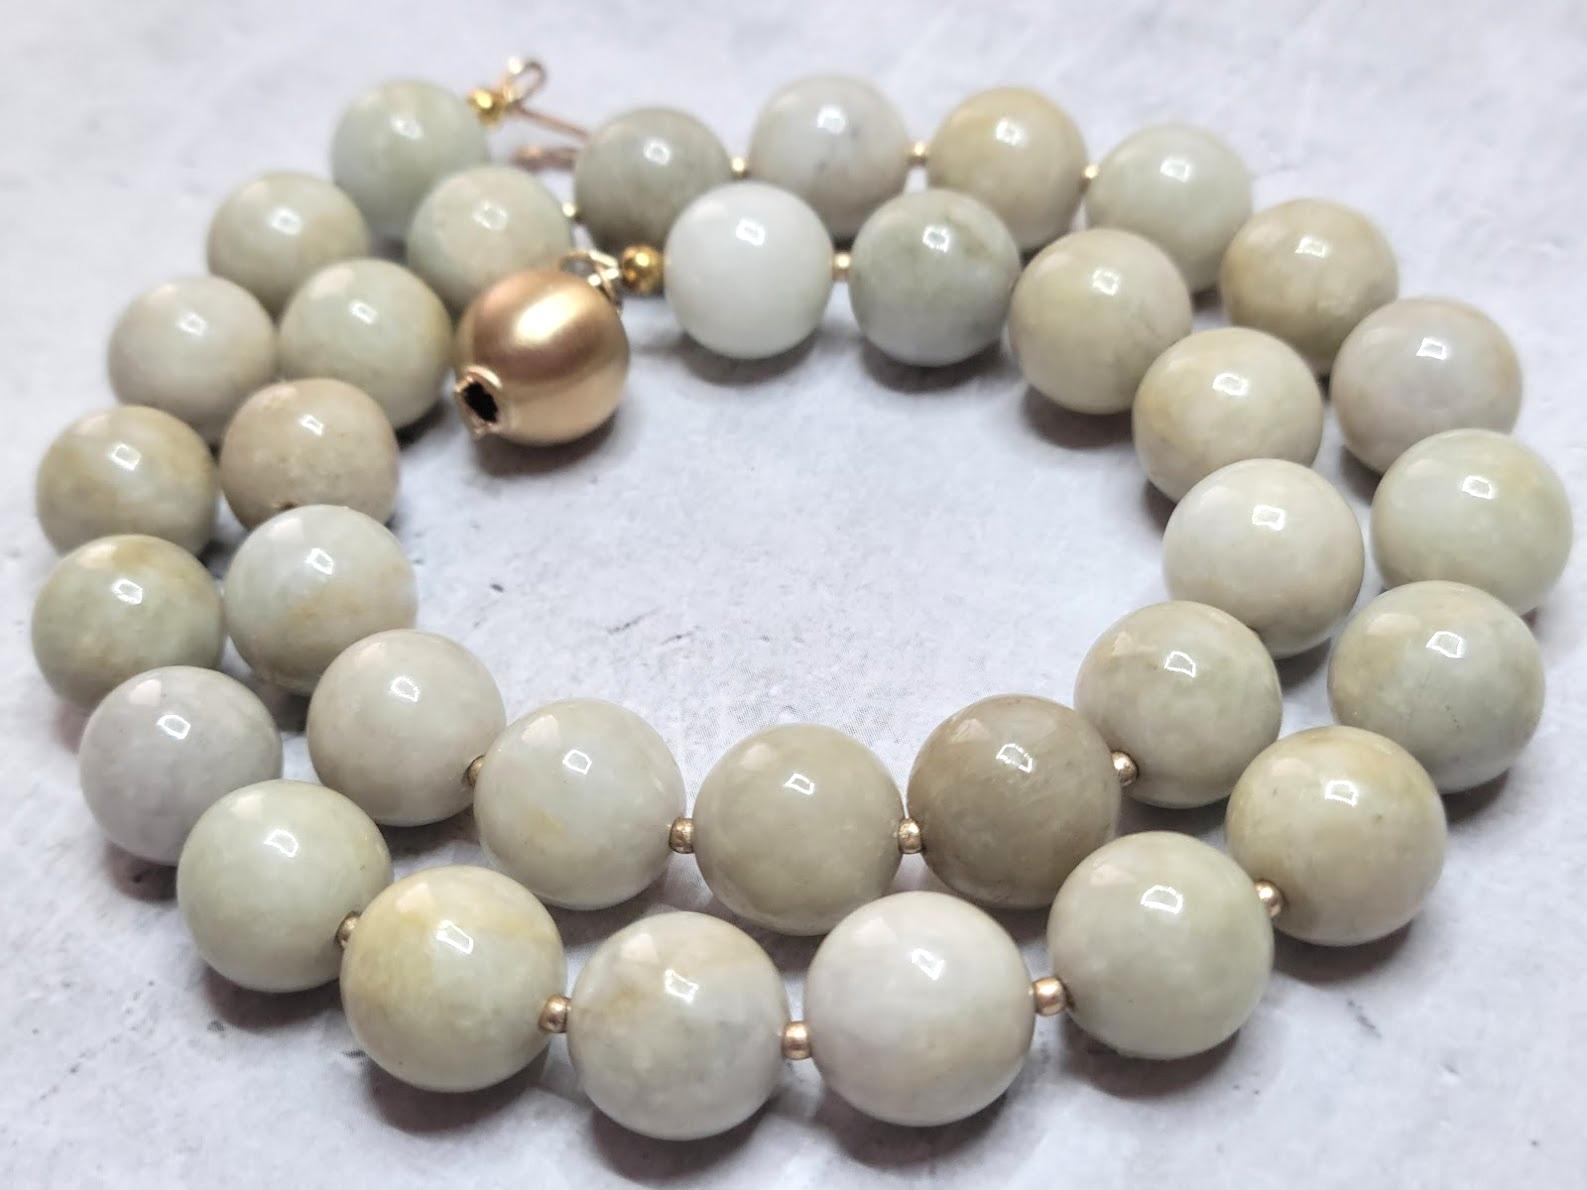 The jade beads on this necklace are undyed, untreated natural creamy honey tan jades of excellent quality. The jade beads are old. Each bead is cut and polished by hand. Presumably, the jade beads belong to the period of the Qing Dynasty (1644 -